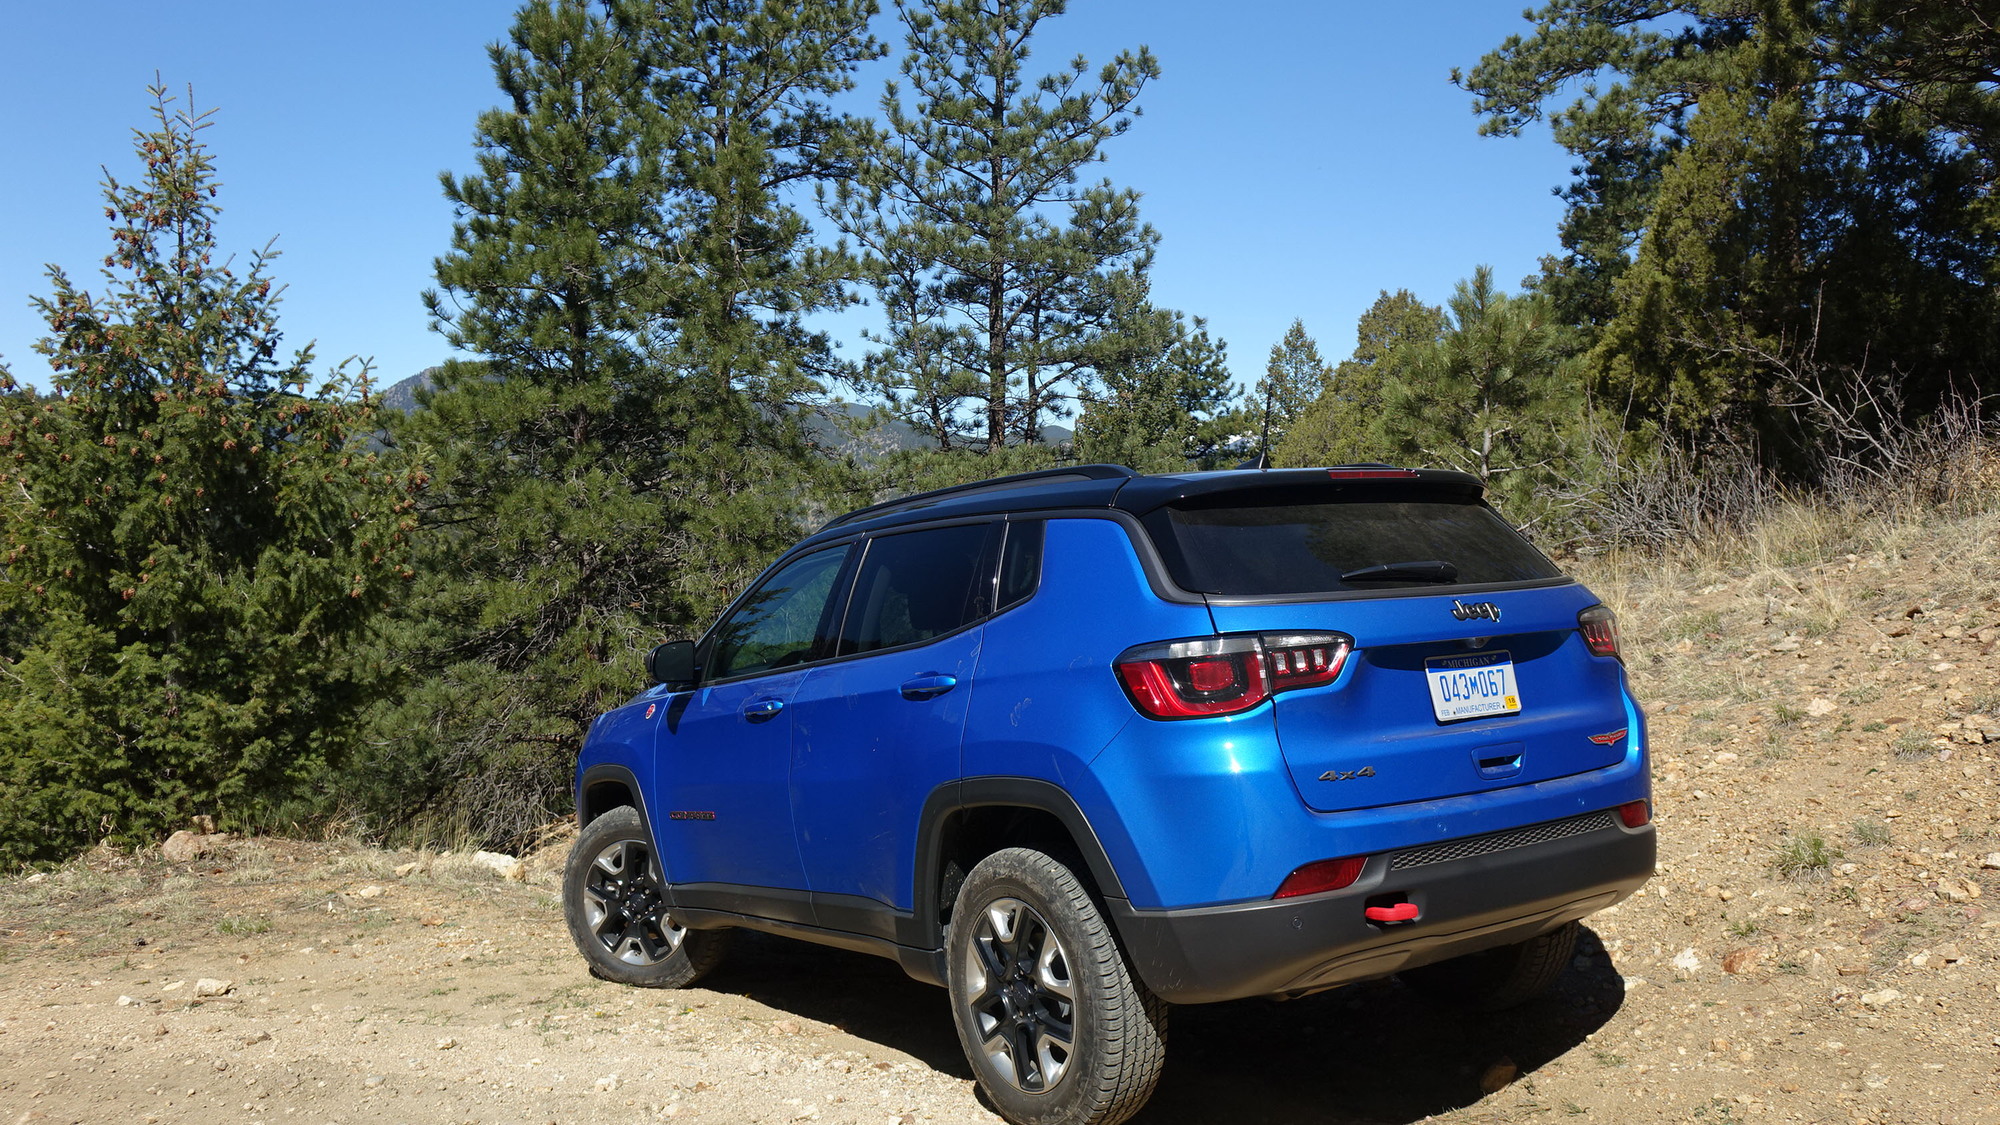 2017 Jeep Compass Trailhawk off-road 